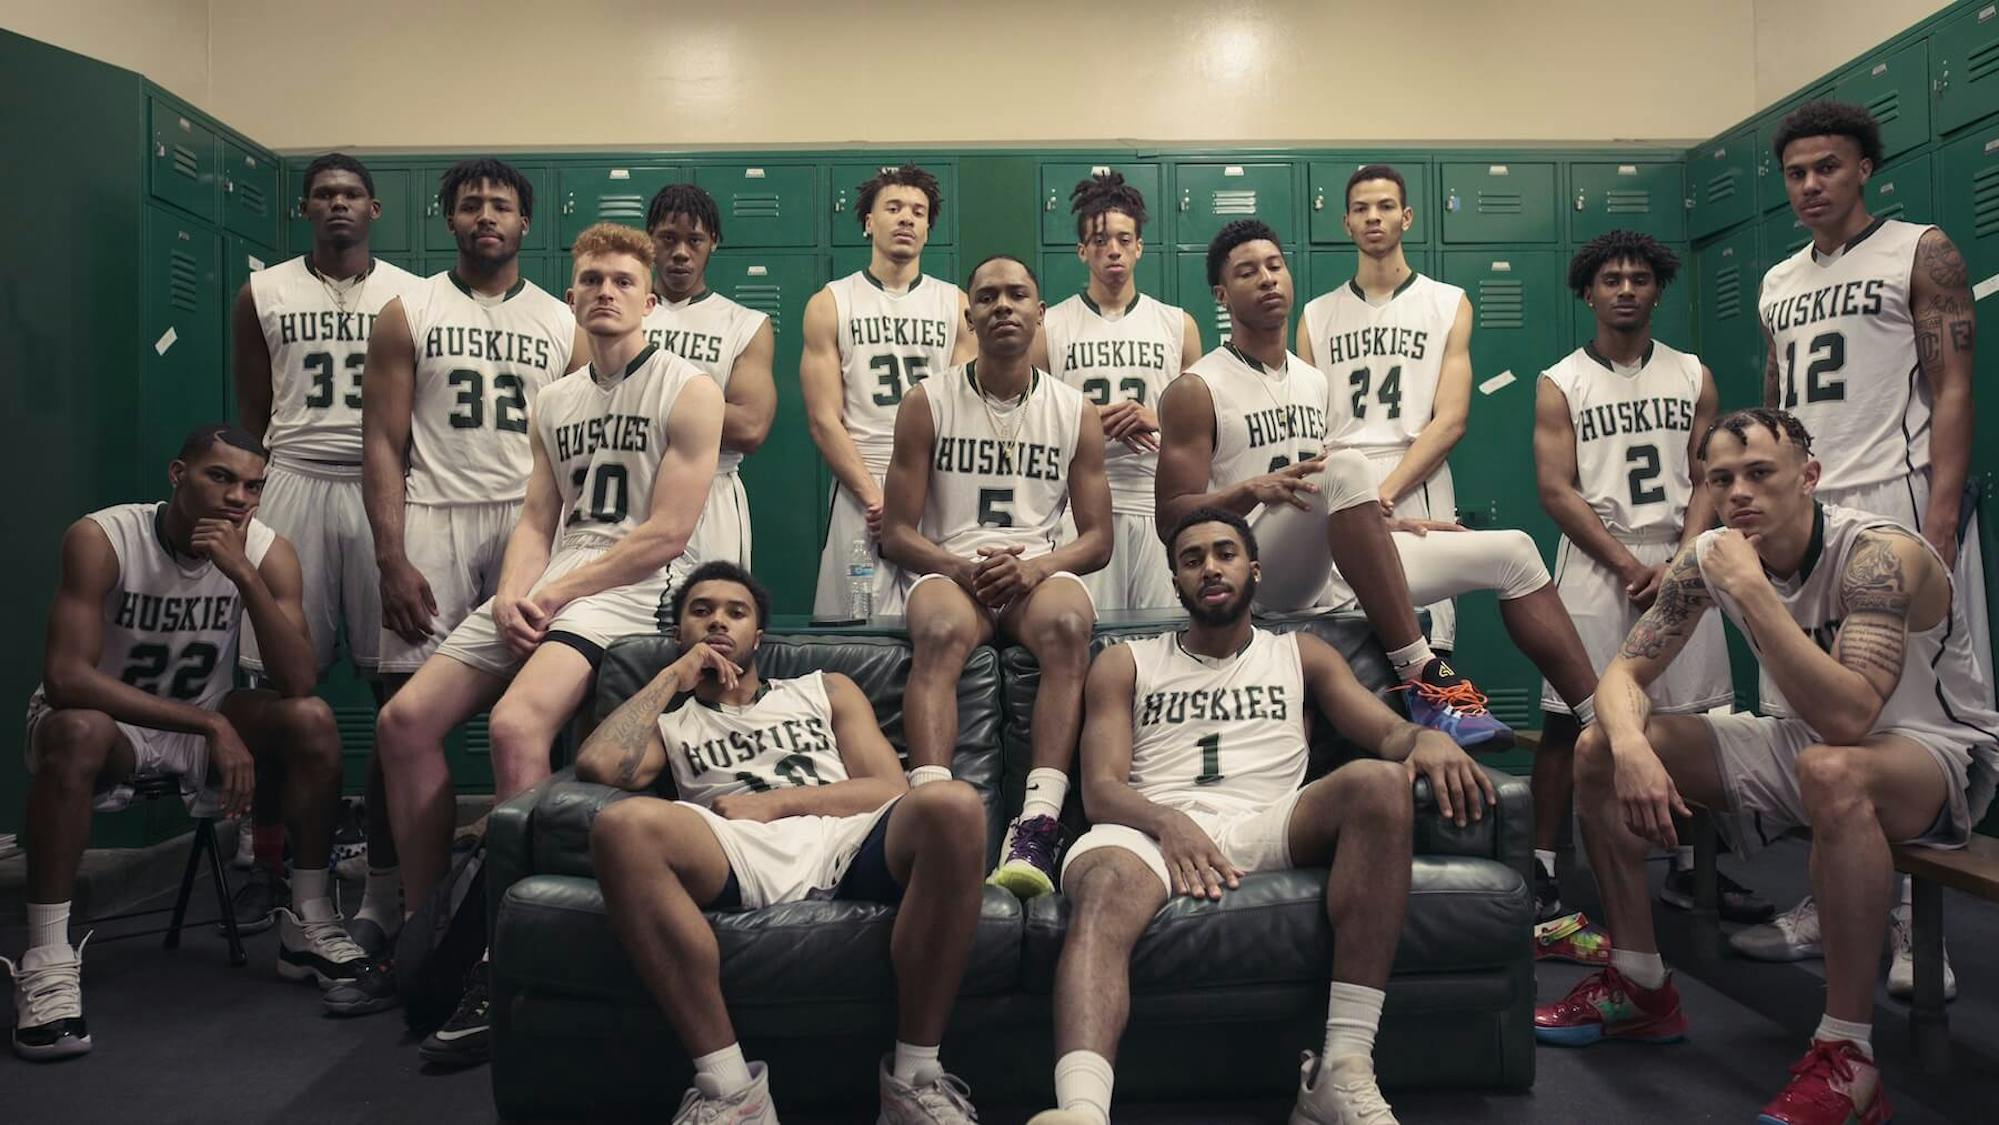 East Los Angeles College Huskies pose for a photo in their green locker room. They wear their jerseys, and look at the camera with serious expressions.